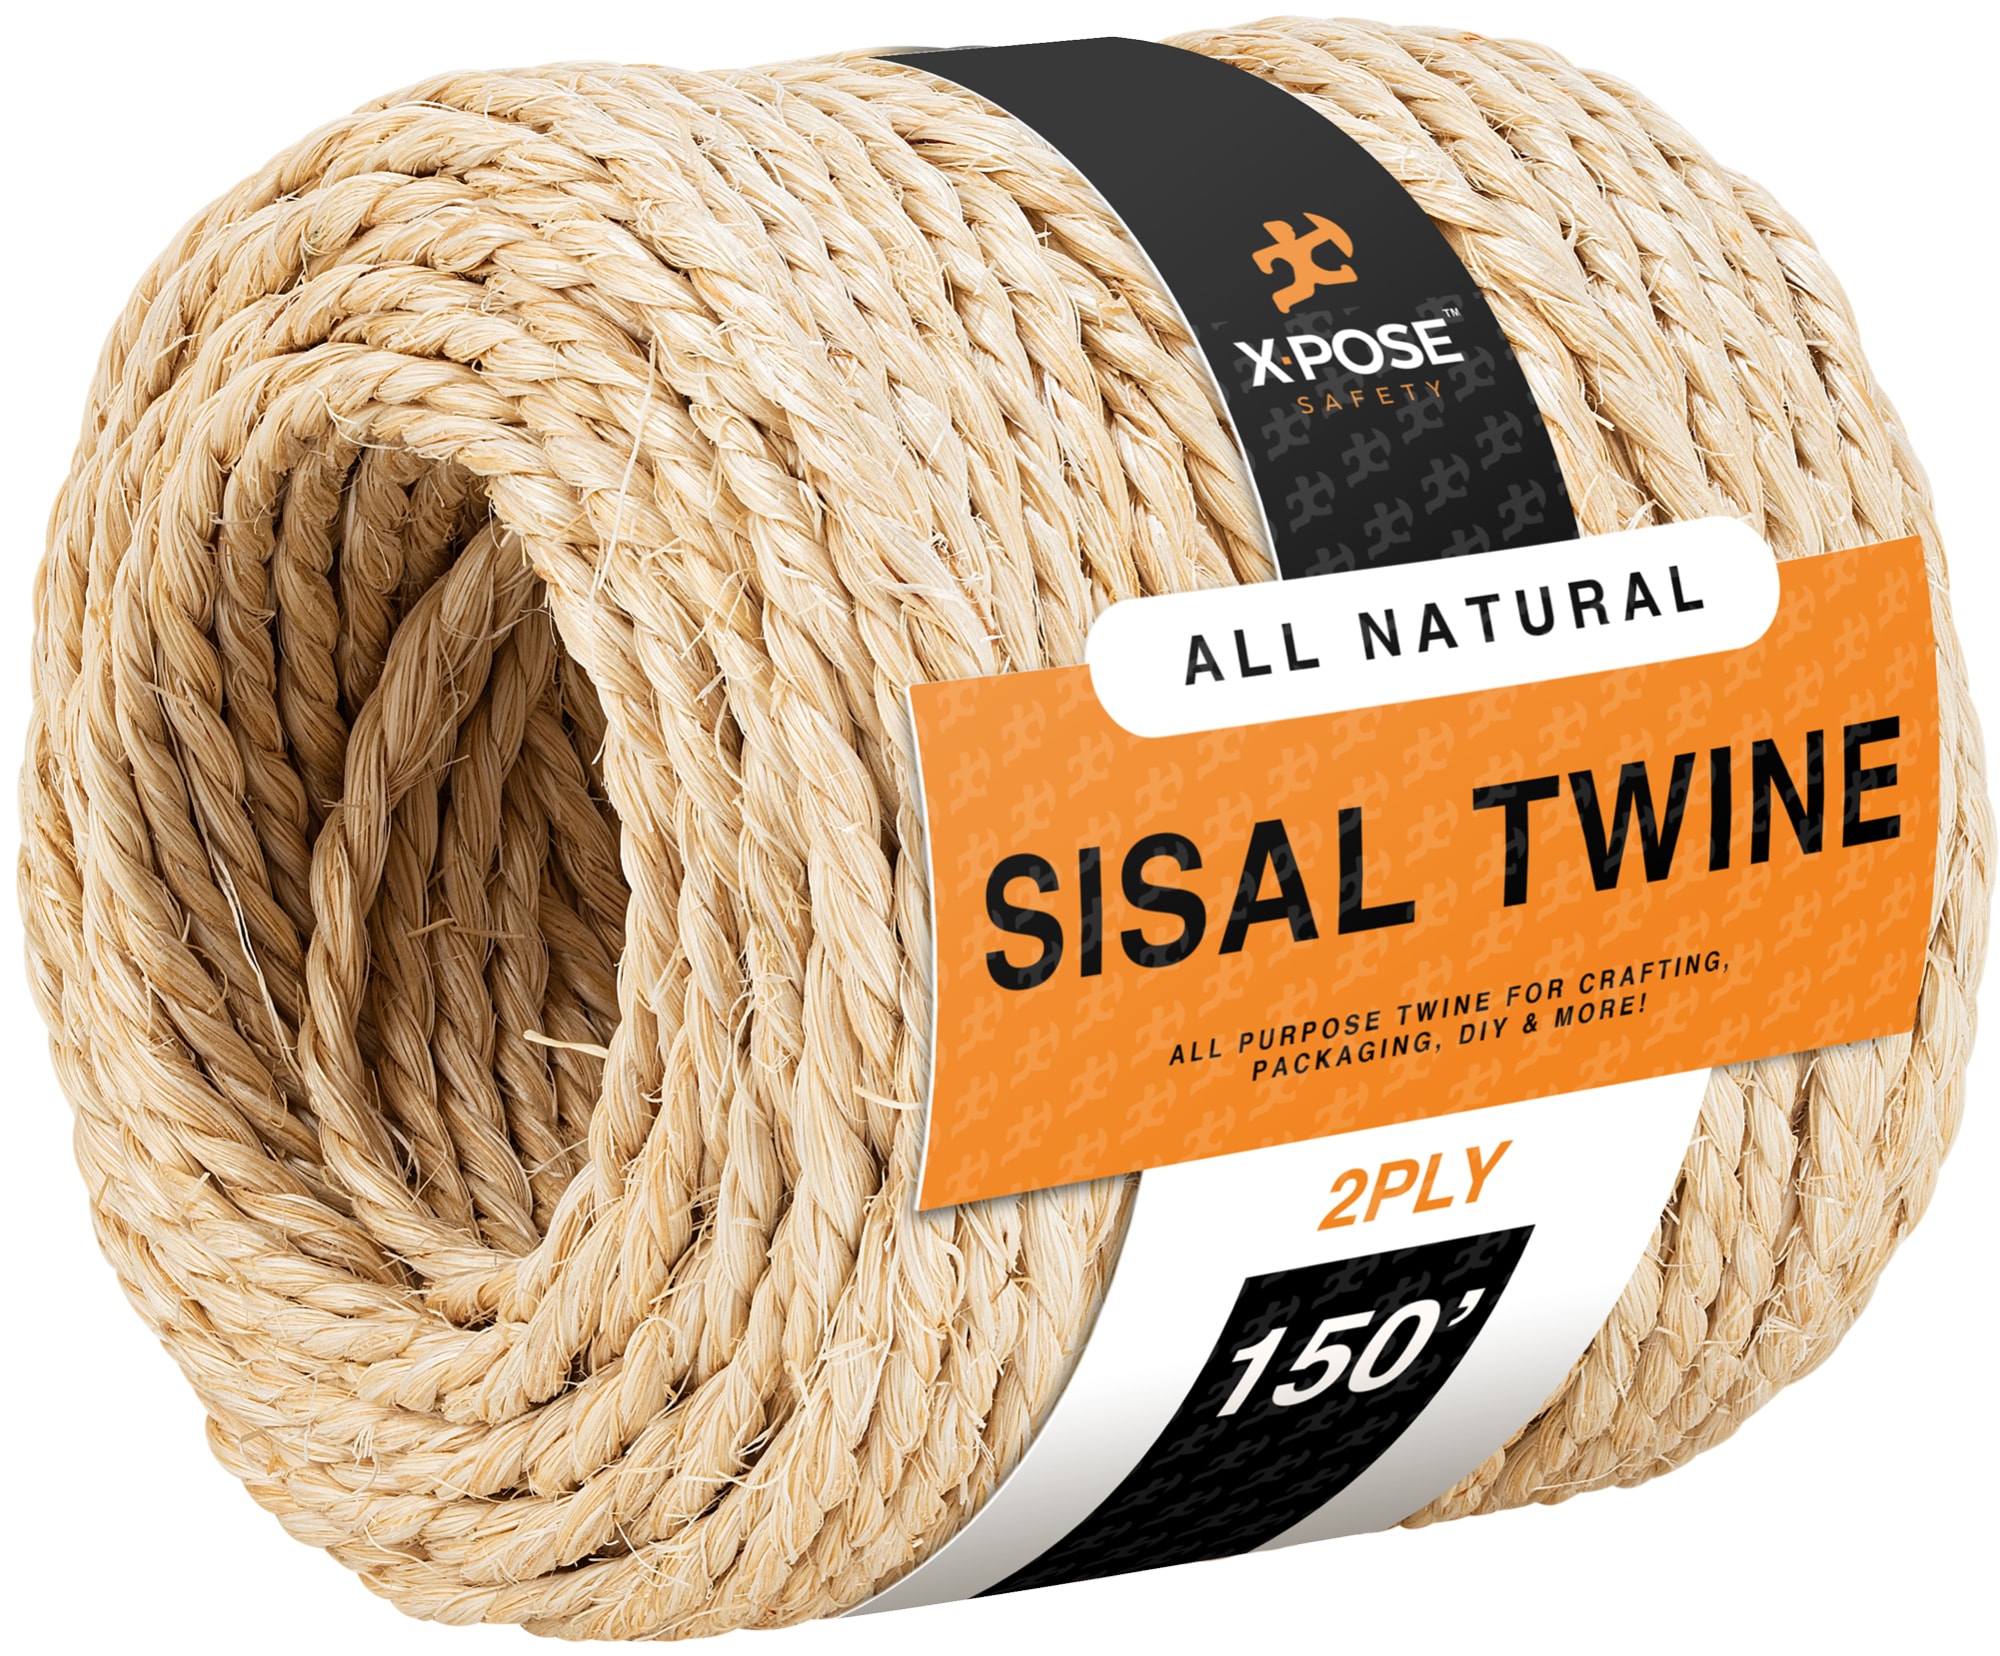 XPOSE SAFETY Sisal Twine - 2 Ply 150 Ft Thin Natural Fiber Rope on